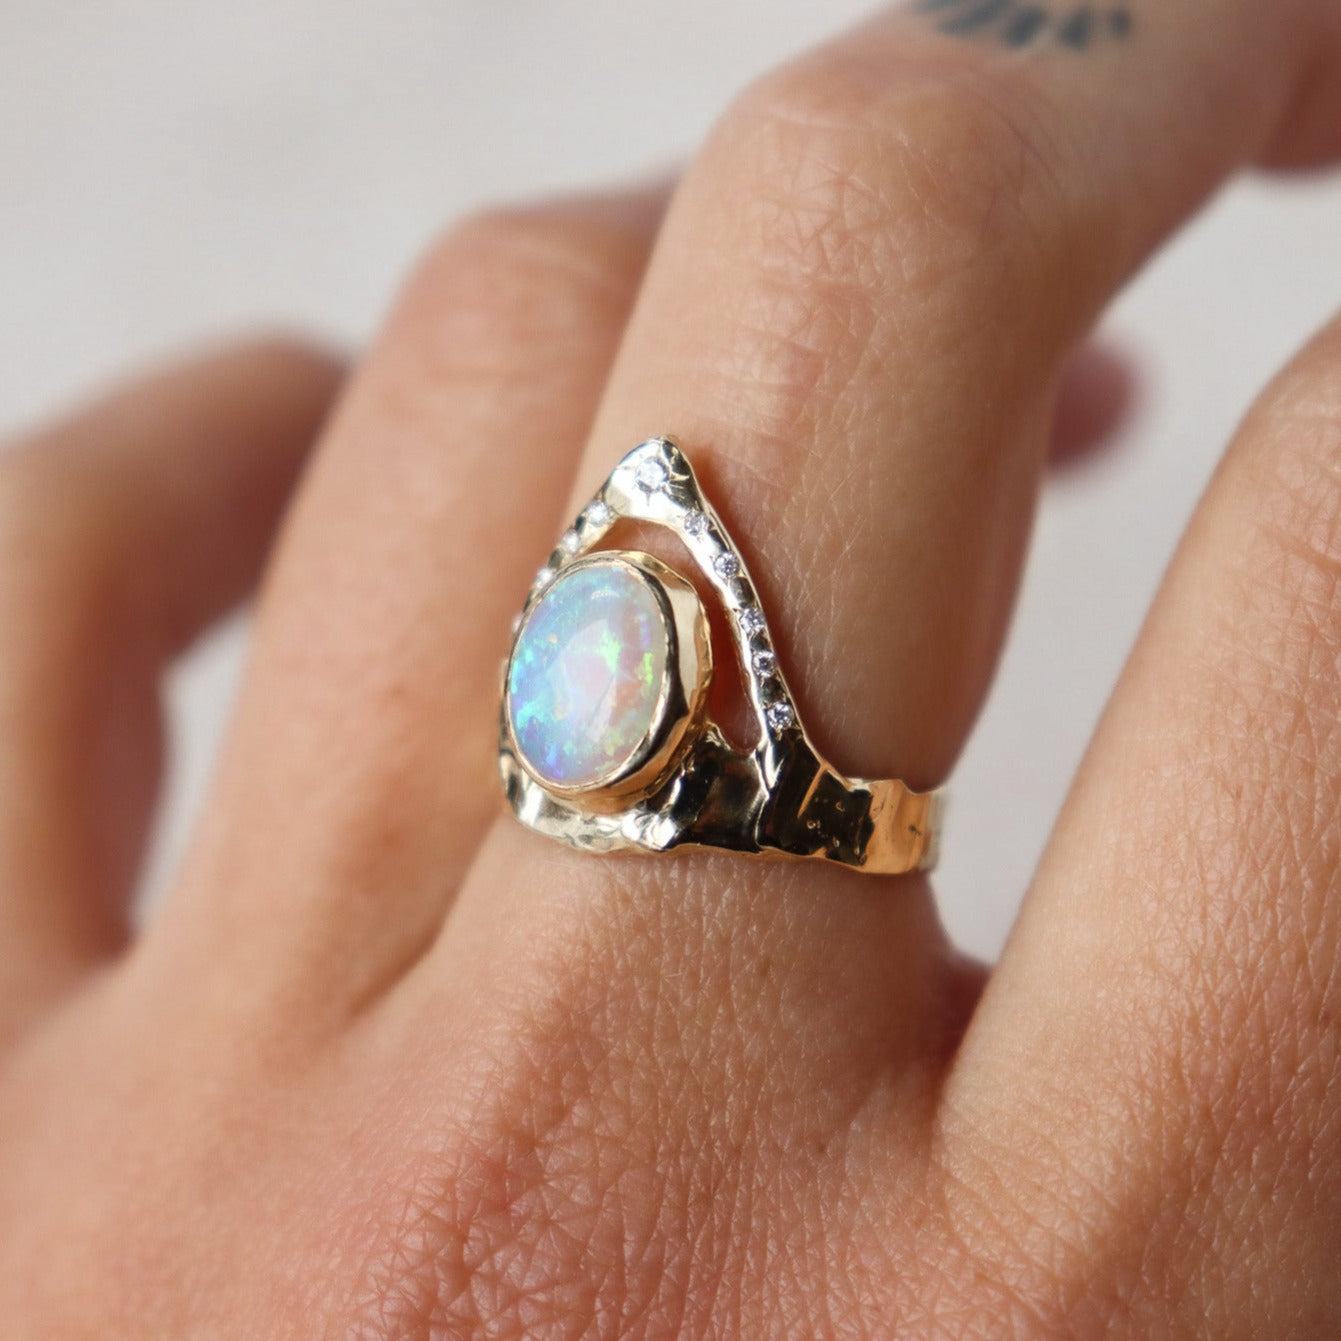 Side view of a ring featuring a bezel-set opal on a wide, organically shaped band, adorned with a crown-like V-shaped band encircling the opal and embellished with glistening diamond accents, shown on a finger for scale